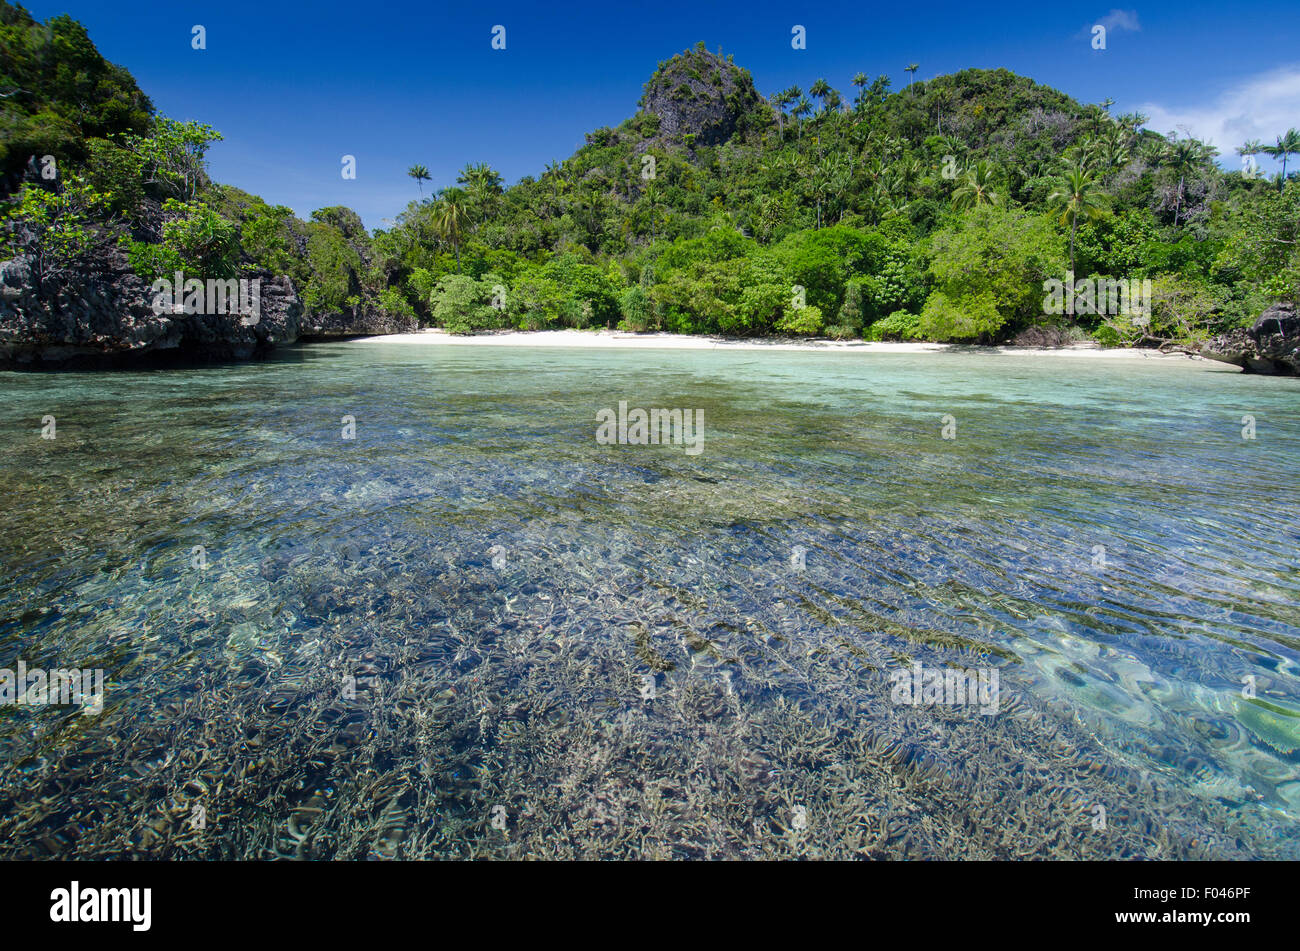 A small white beach fringed by coral reef and surrounded by greenery, Misool area, Raja Ampat, Indonesia, Pacific Ocean Stock Photo